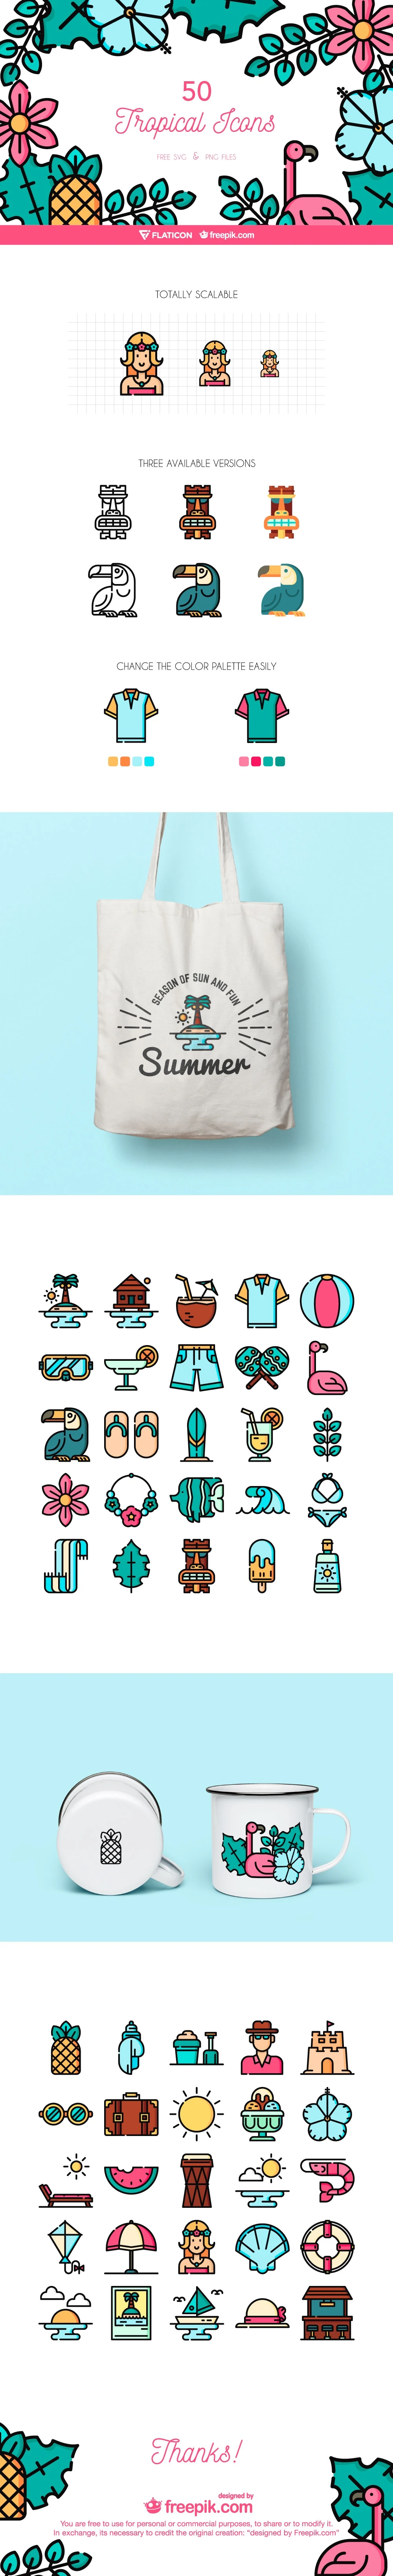 Tropical Icon Set - The Tropical Icon Set includes individual icons of palm trees, beach balls, cocktails, surfboards, waves, ice creams, bikinis, suntan lotions… everything you would expect to see and use on a warm tropical vacation.